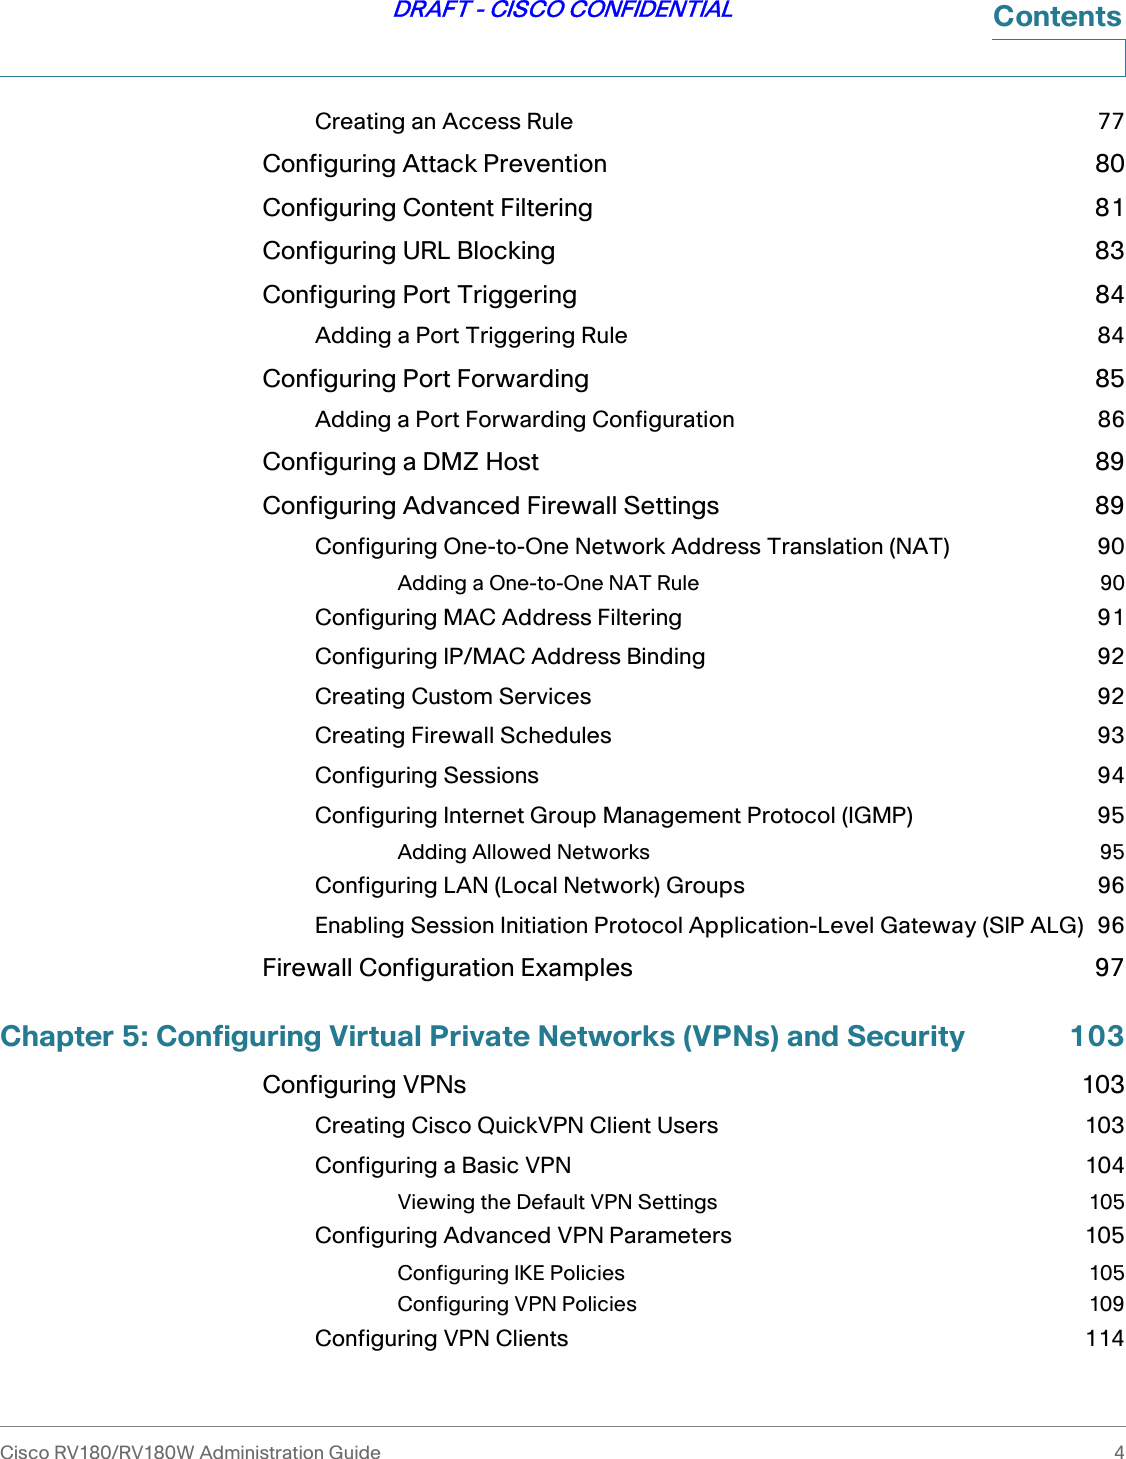 Cisco RV180/RV180W Administration Guide 4DRAFT - CISCO CONFIDENTIALContentsCreating an Access Rule 77Configuring Attack Prevention 80Configuring Content Filtering 81Configuring URL Blocking 83Configuring Port Triggering 84Adding a Port Triggering Rule 84Configuring Port Forwarding 85Adding a Port Forwarding Configuration 86Configuring a DMZ Host 89Configuring Advanced Firewall Settings 89Configuring One-to-One Network Address Translation (NAT) 90Adding a One-to-One NAT Rule 90Configuring MAC Address Filtering 91Configuring IP/MAC Address Binding 92Creating Custom Services 92Creating Firewall Schedules 93Configuring Sessions 94Configuring Internet Group Management Protocol (IGMP) 95Adding Allowed Networks 95Configuring LAN (Local Network) Groups 96Enabling Session Initiation Protocol Application-Level Gateway (SIP ALG) 96Firewall Configuration Examples 97Chapter 5: Configuring Virtual Private Networks (VPNs) and Security 103Configuring VPNs 103Creating Cisco QuickVPN Client Users 103Configuring a Basic VPN 104Viewing the Default VPN Settings 105Configuring Advanced VPN Parameters 105Configuring IKE Policies 105Configuring VPN Policies 109Configuring VPN Clients 114